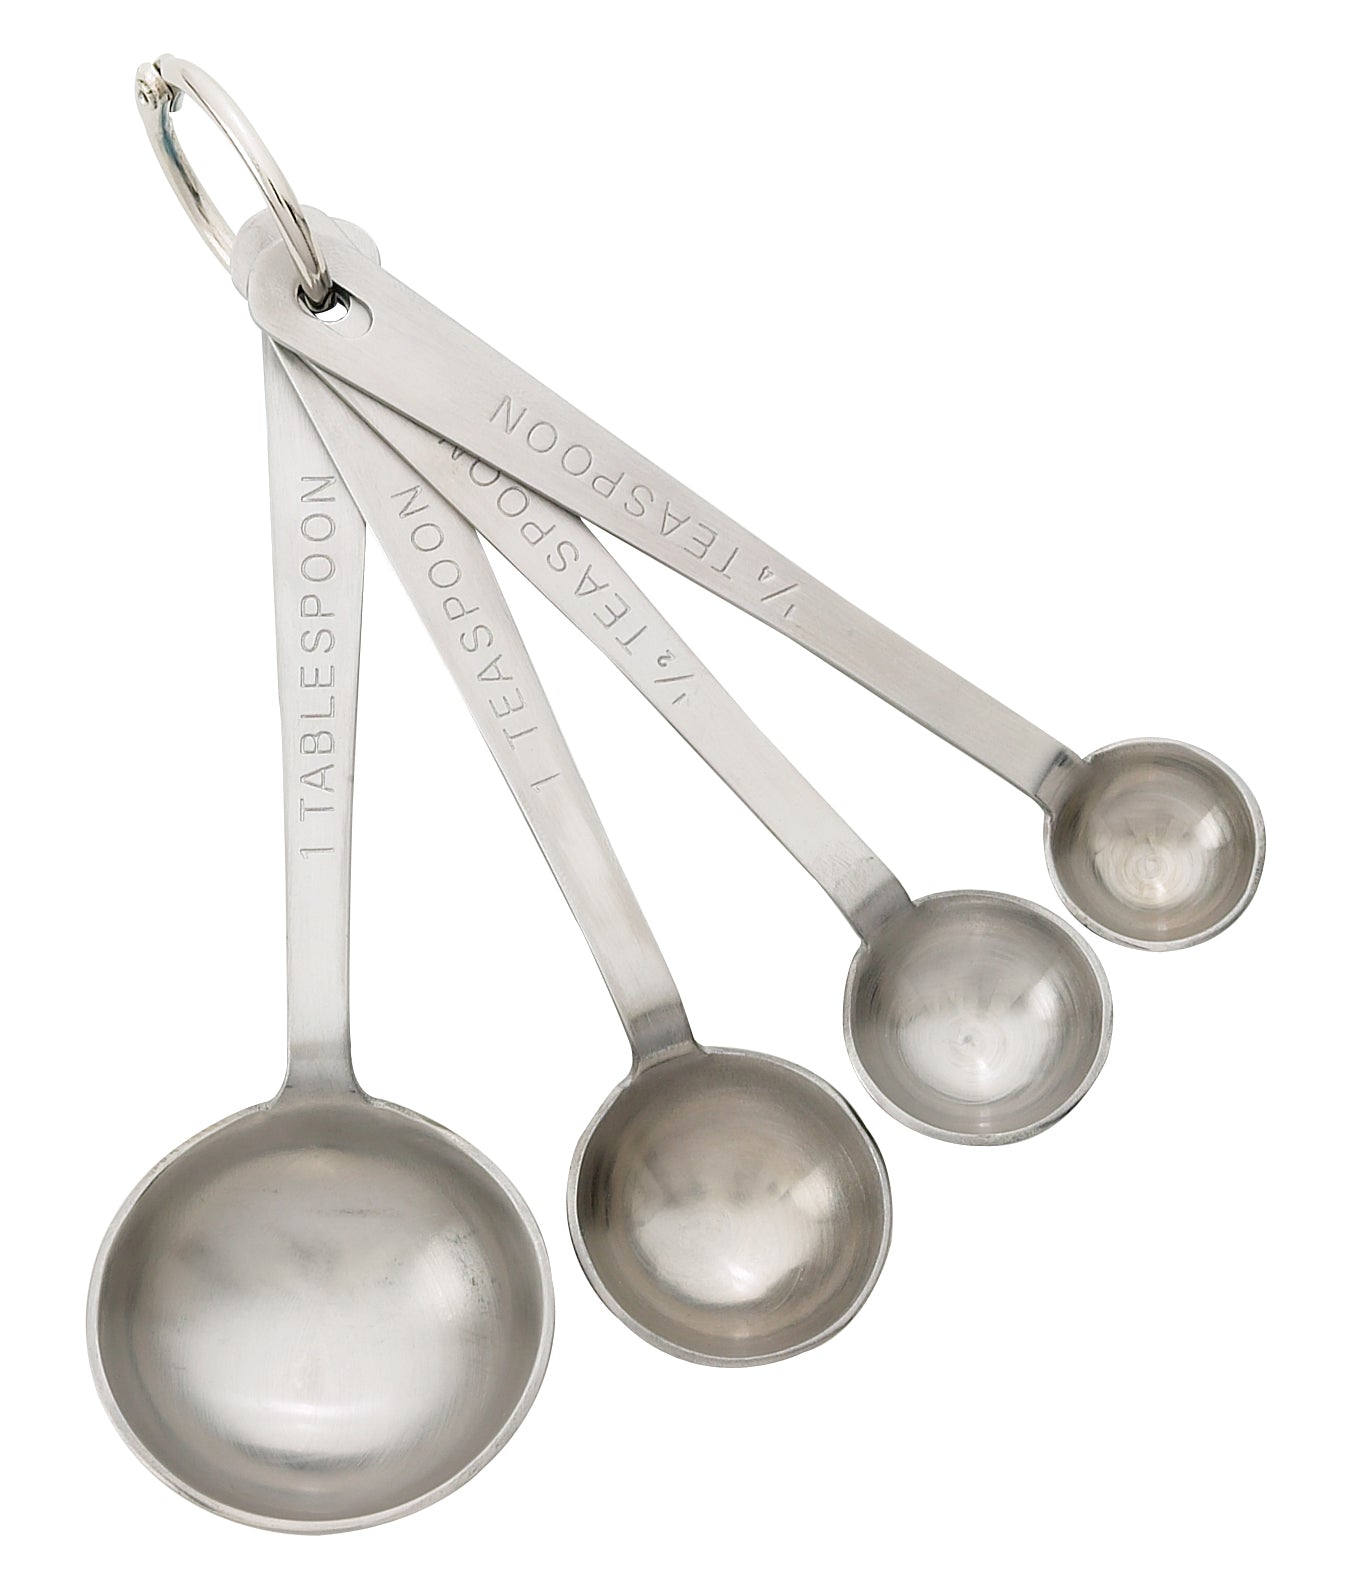 Mrs. Anderson's Stainless Steel Measuring Spoons – 4 Piece Set